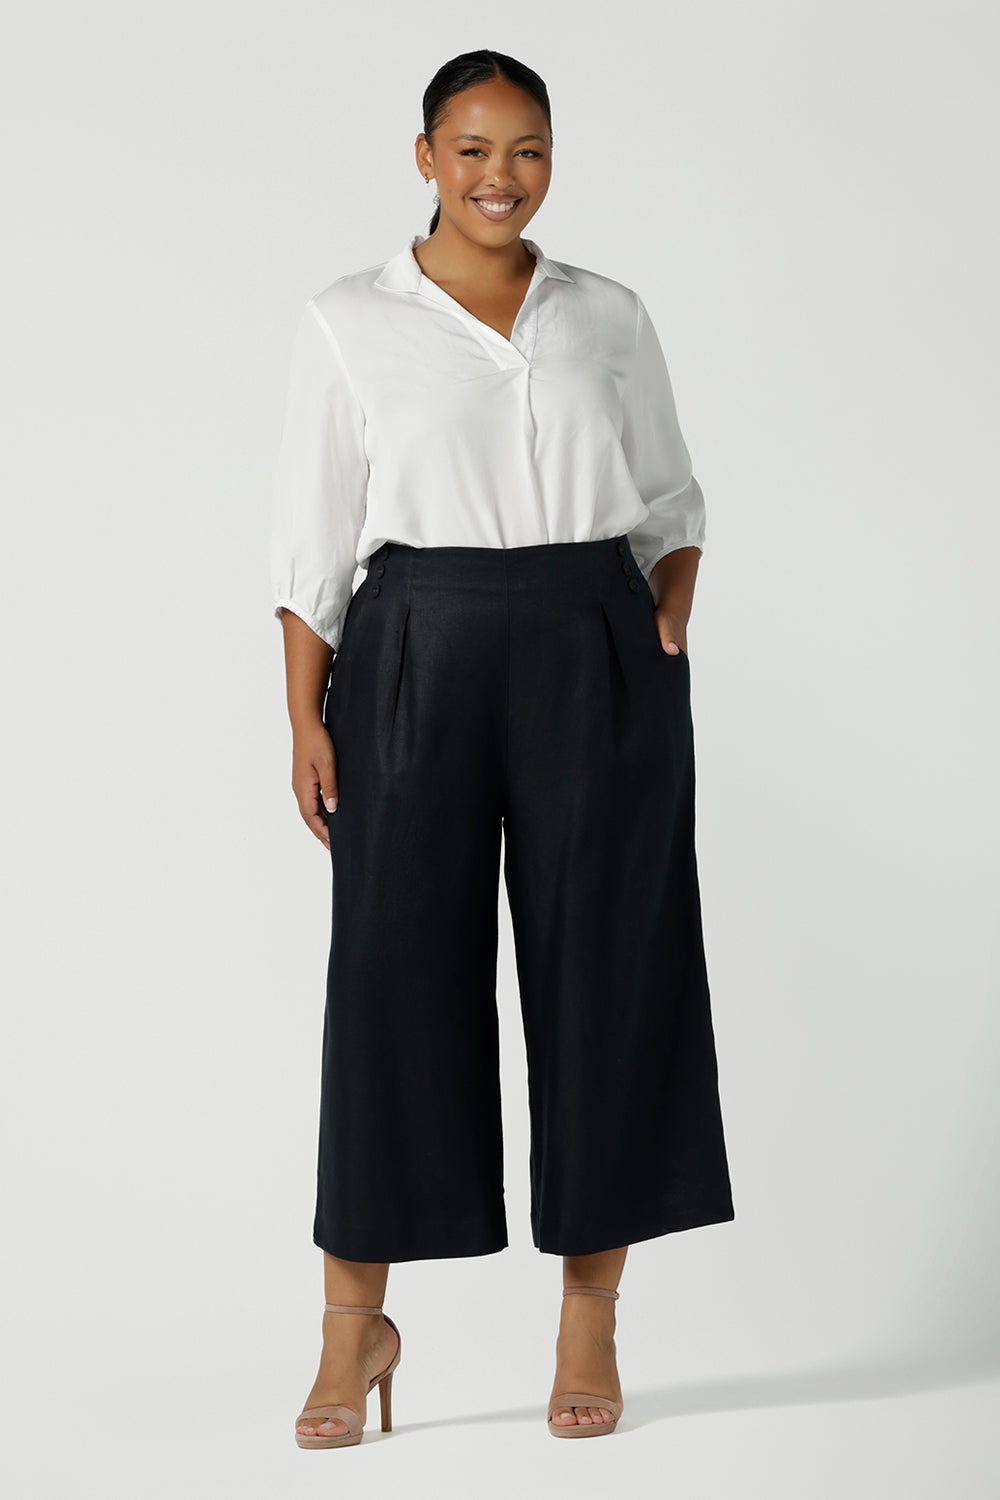 A corporate woman size 16 wears a linen Nik Pant in Midnight navy back with a white Arley shirt. A tailored pant with buttons and pleat front with a zip at the side. Petite height friendly. Linen fabric is a natural breathable material. Made in Australia for women size 8 - 24.